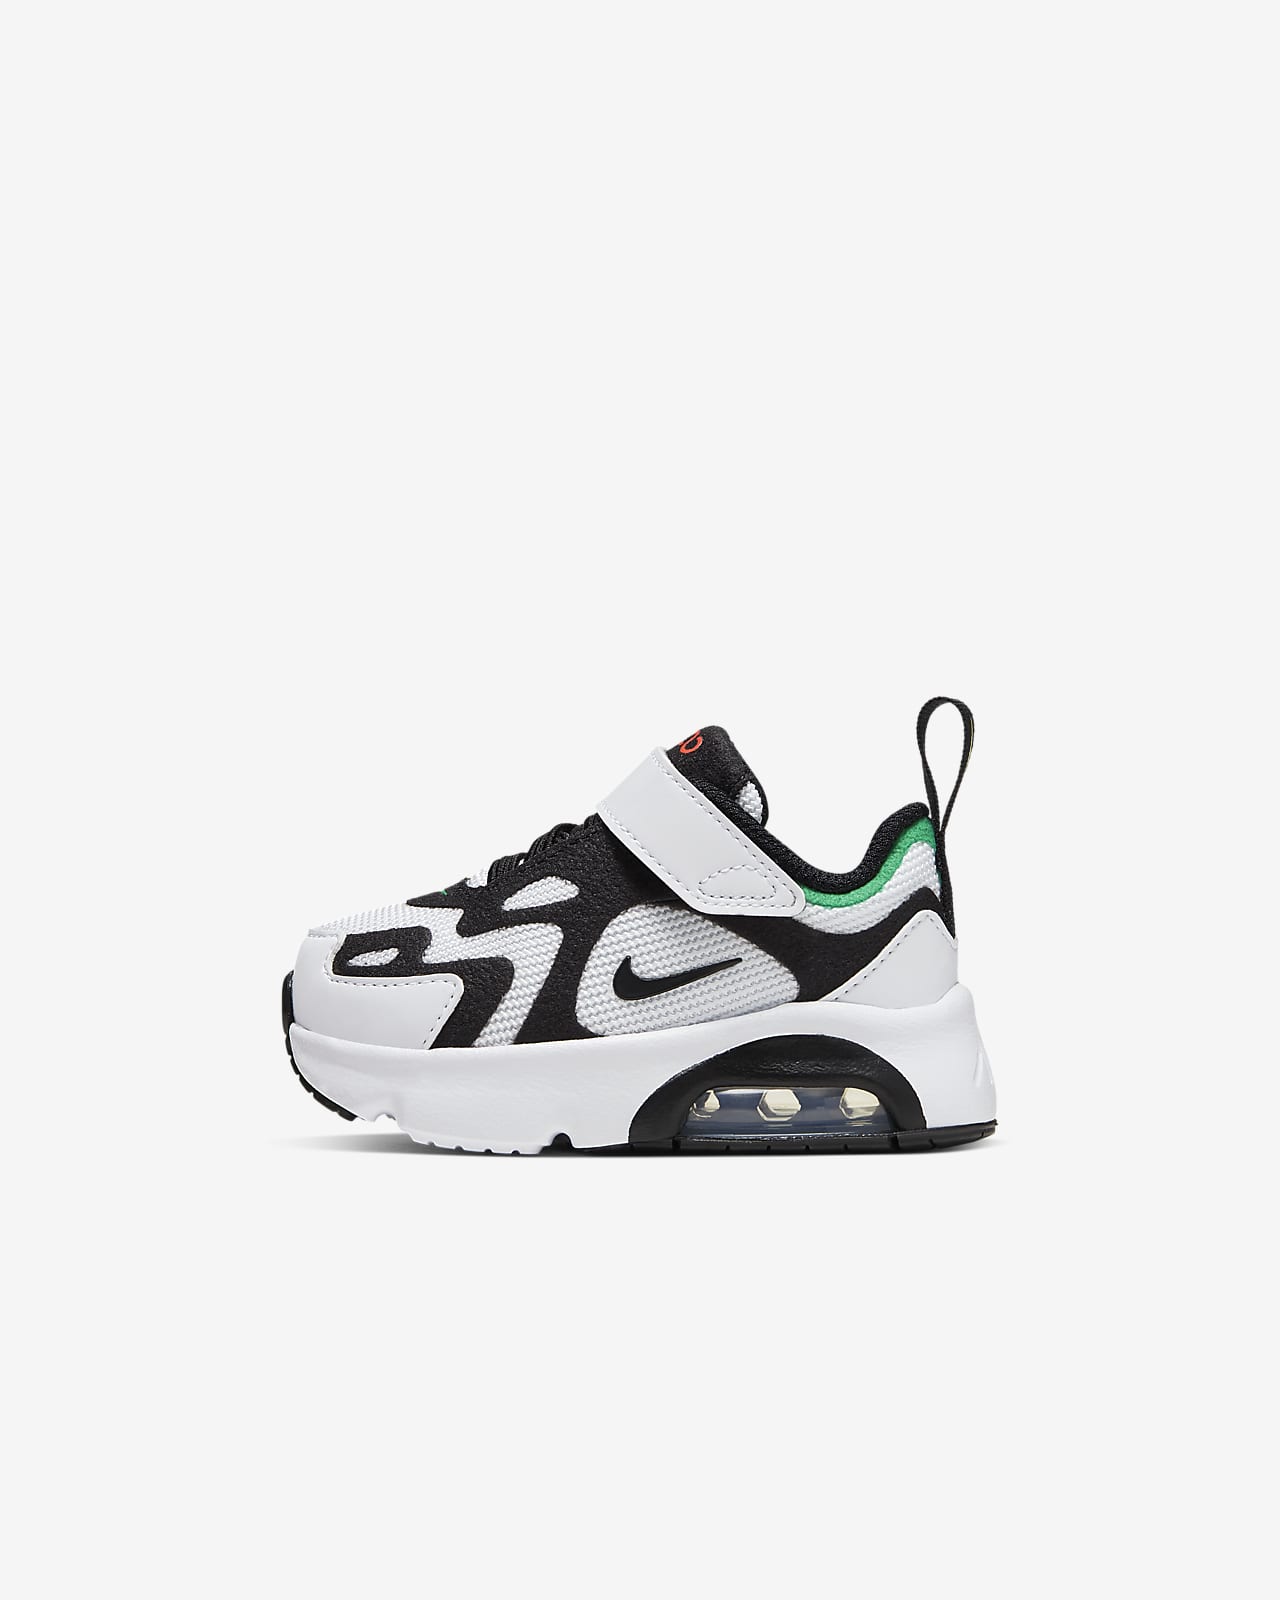 baby girl nike air max trainers